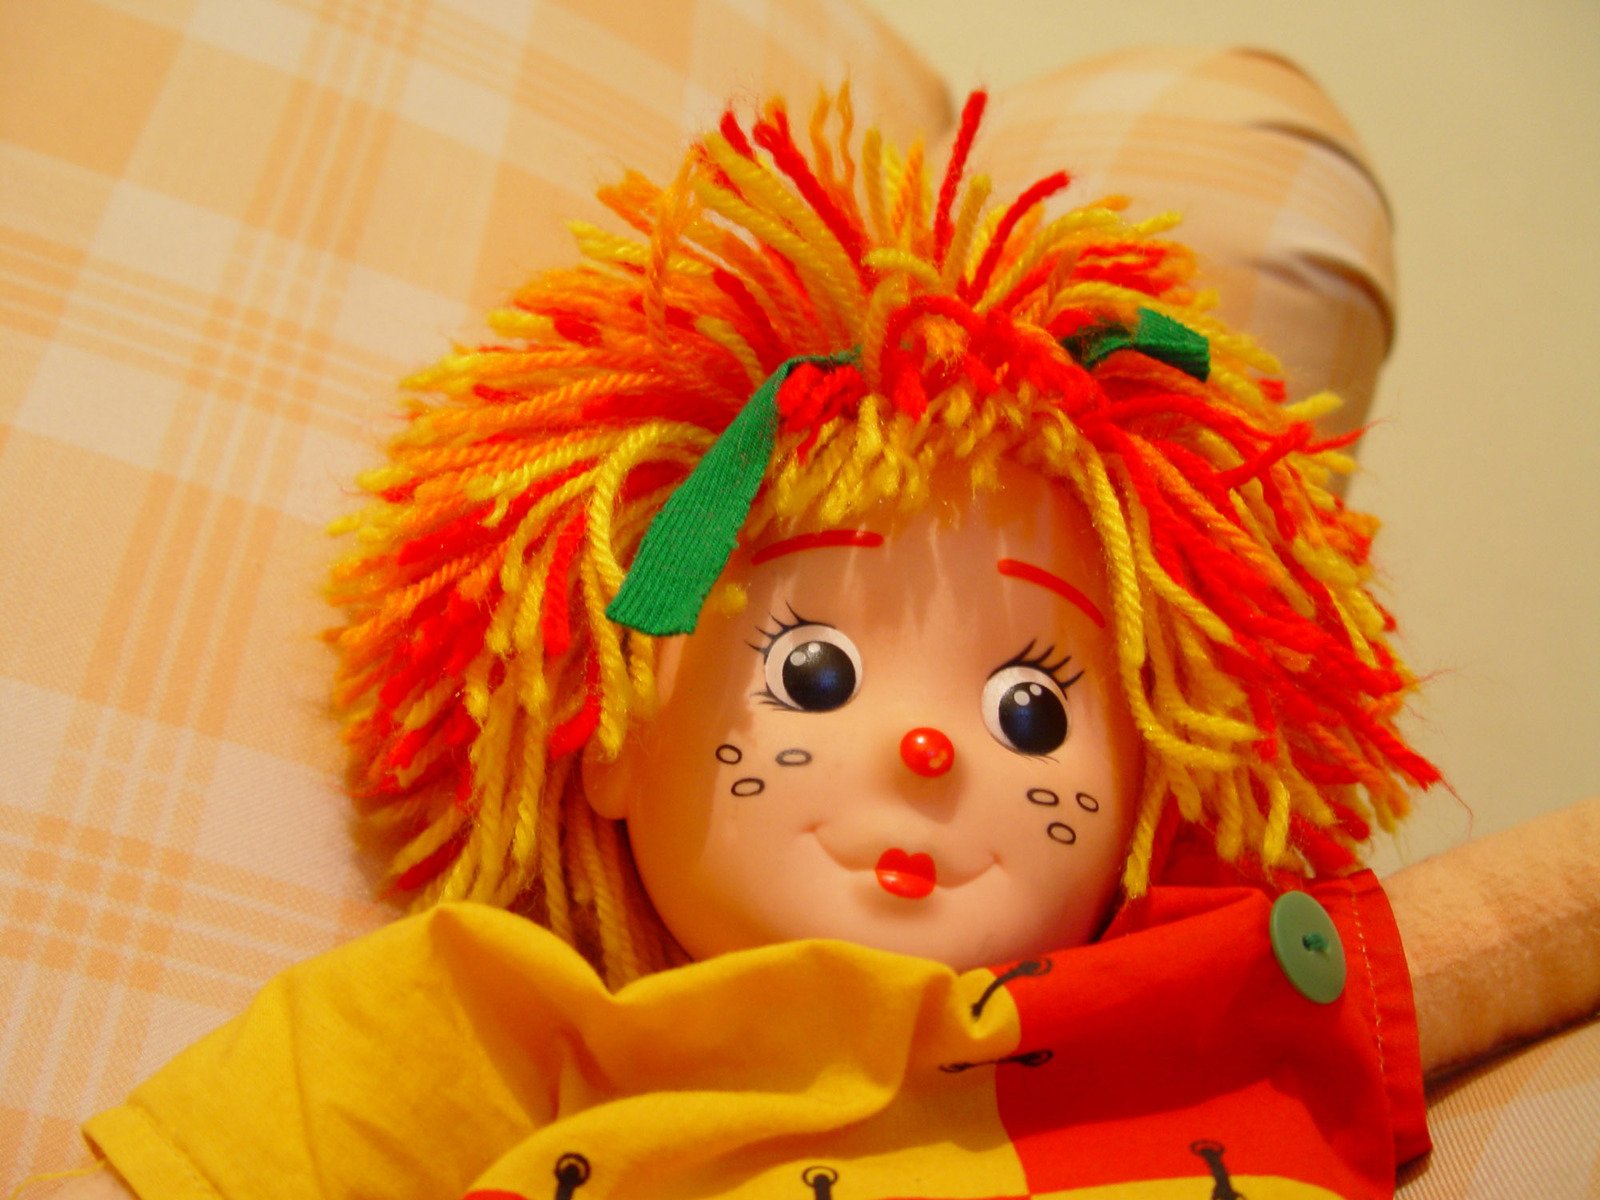 this is a vintage toy with a very colorful hair